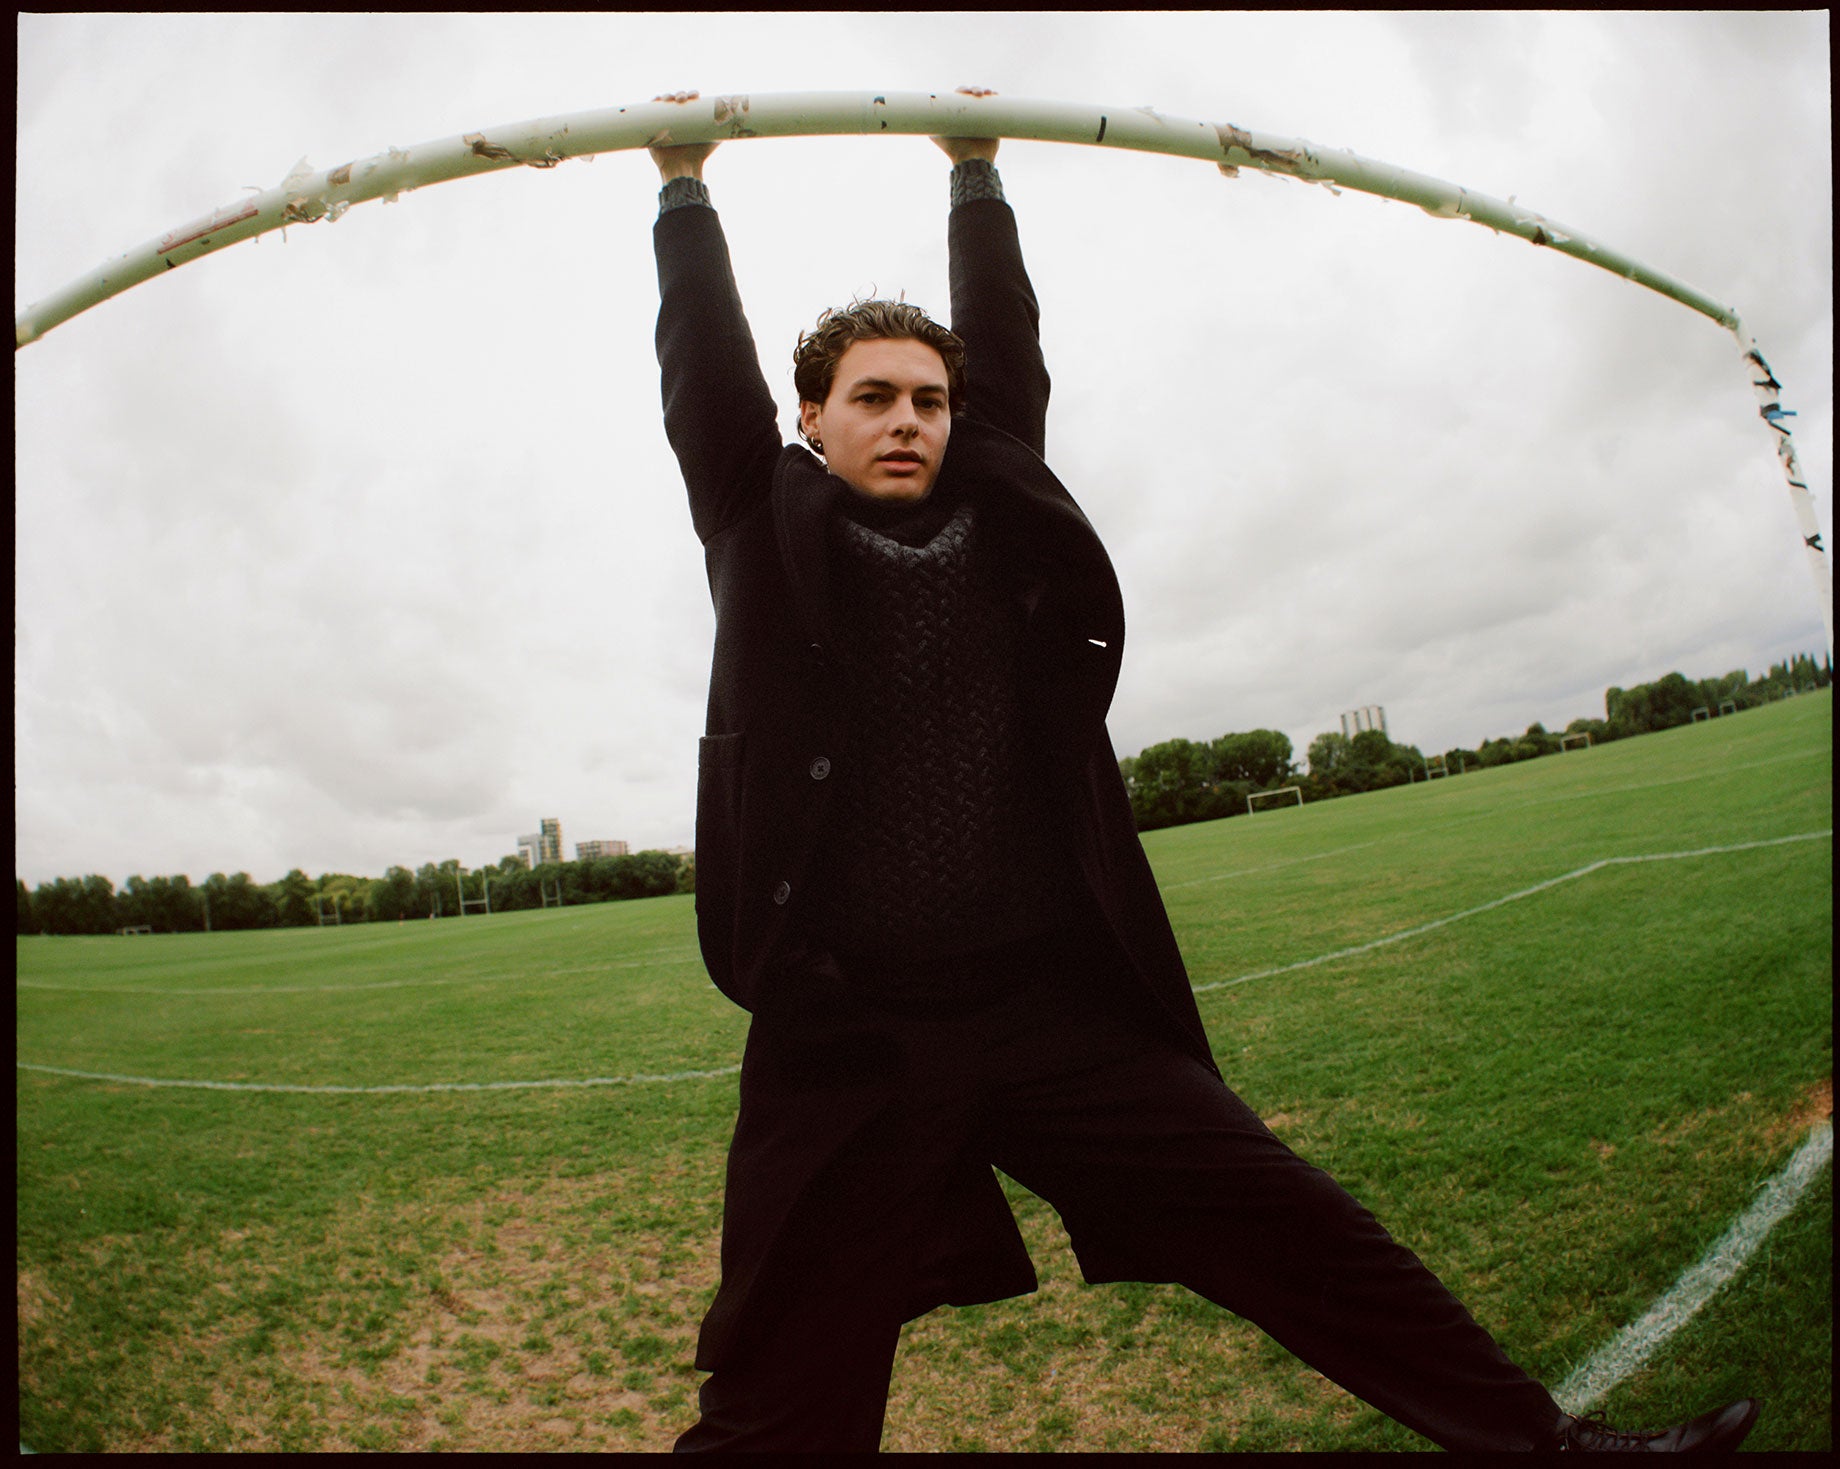 Model wearing Wax London outfit hanging from goal posts on football pitch